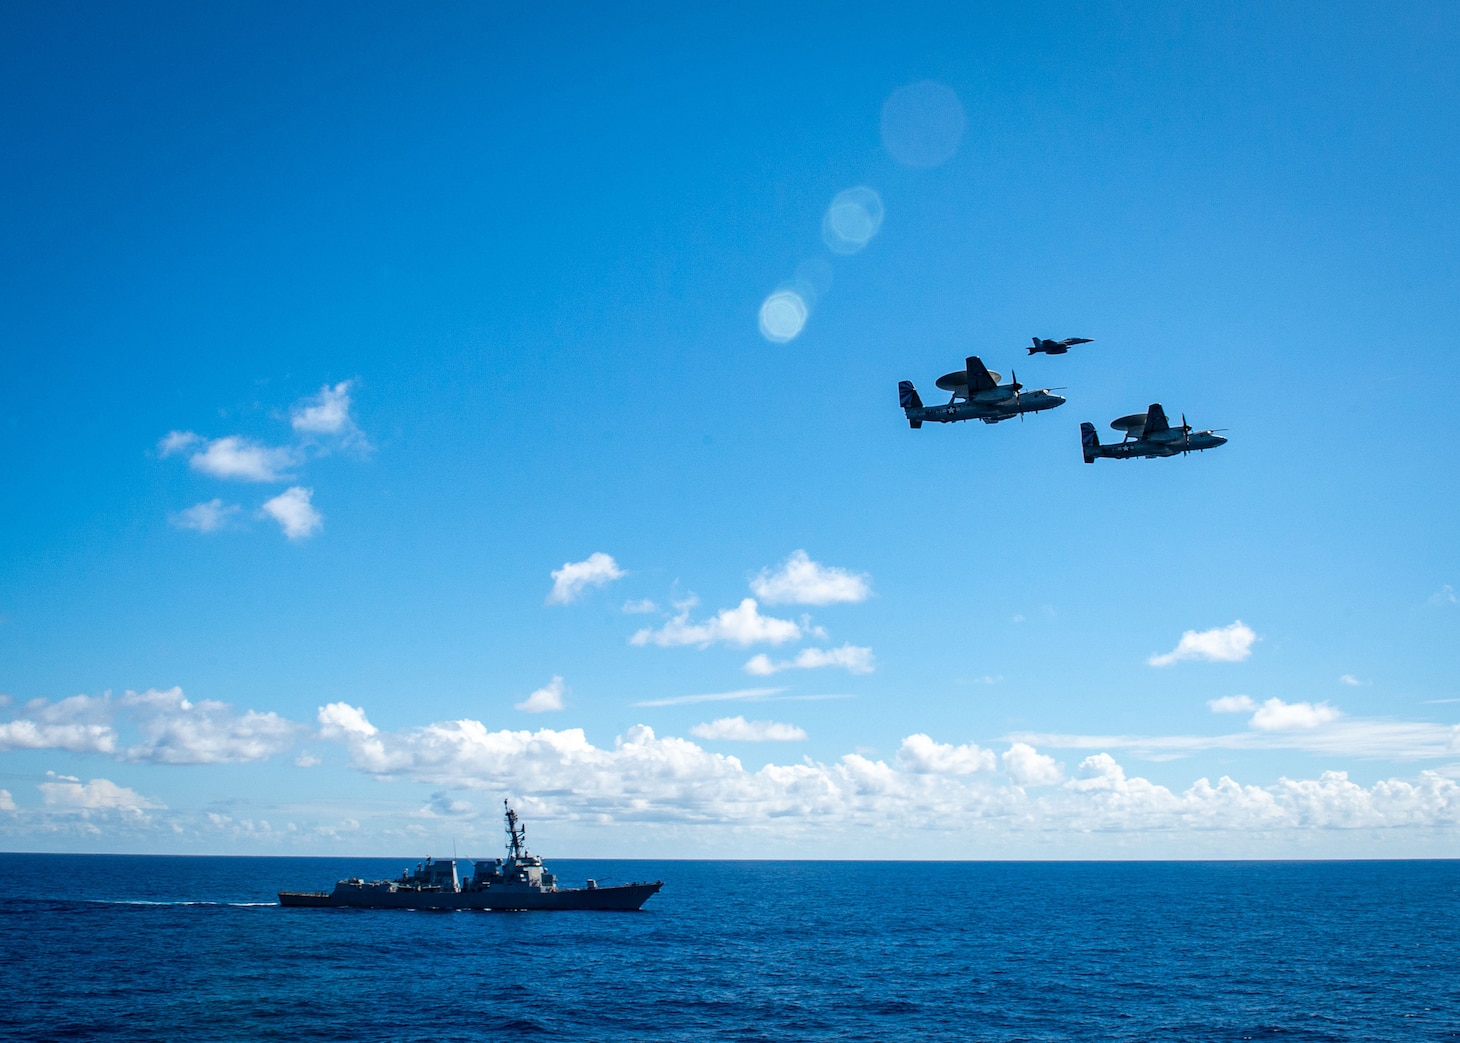 (March 17, 2023) Two E-2D Hawkeye aircraft and an F/A-18 Super Hornet Aircraft attached to Carrier Air Wing (CVW) 7, perform a flyover above the Arleigh Burke-class destroyer USS Delbert D. Black (DDG 119), during a change of command ceremony, March 17, 2023. During the ceremony Cmdr. Matthew Campbell relieved Cmdr. Robert Whitmore as commander, VAW-121. CVW-7 is the offensive air and strike component of Carrier Strike Group (CSG) 10 and the George H.W. Bush CSG. The squadrons of CVW-7 are Strike Fighter Squadron (VFA) 143, VFA-103, VFA-86, VFA-136, VAW-121, Electronic Attack Squadron (VAQ) 140, Helicopter Sea Combat Squadron (HSC) 5, and Helicopter Maritime Strike Squadron (HSM) 46. The George H.W. Bush CSG is on a scheduled deployment in the U.S. Naval Forces Europe area of operations, employed by U.S. Sixth Fleet to defend U.S., allied and partner interests.